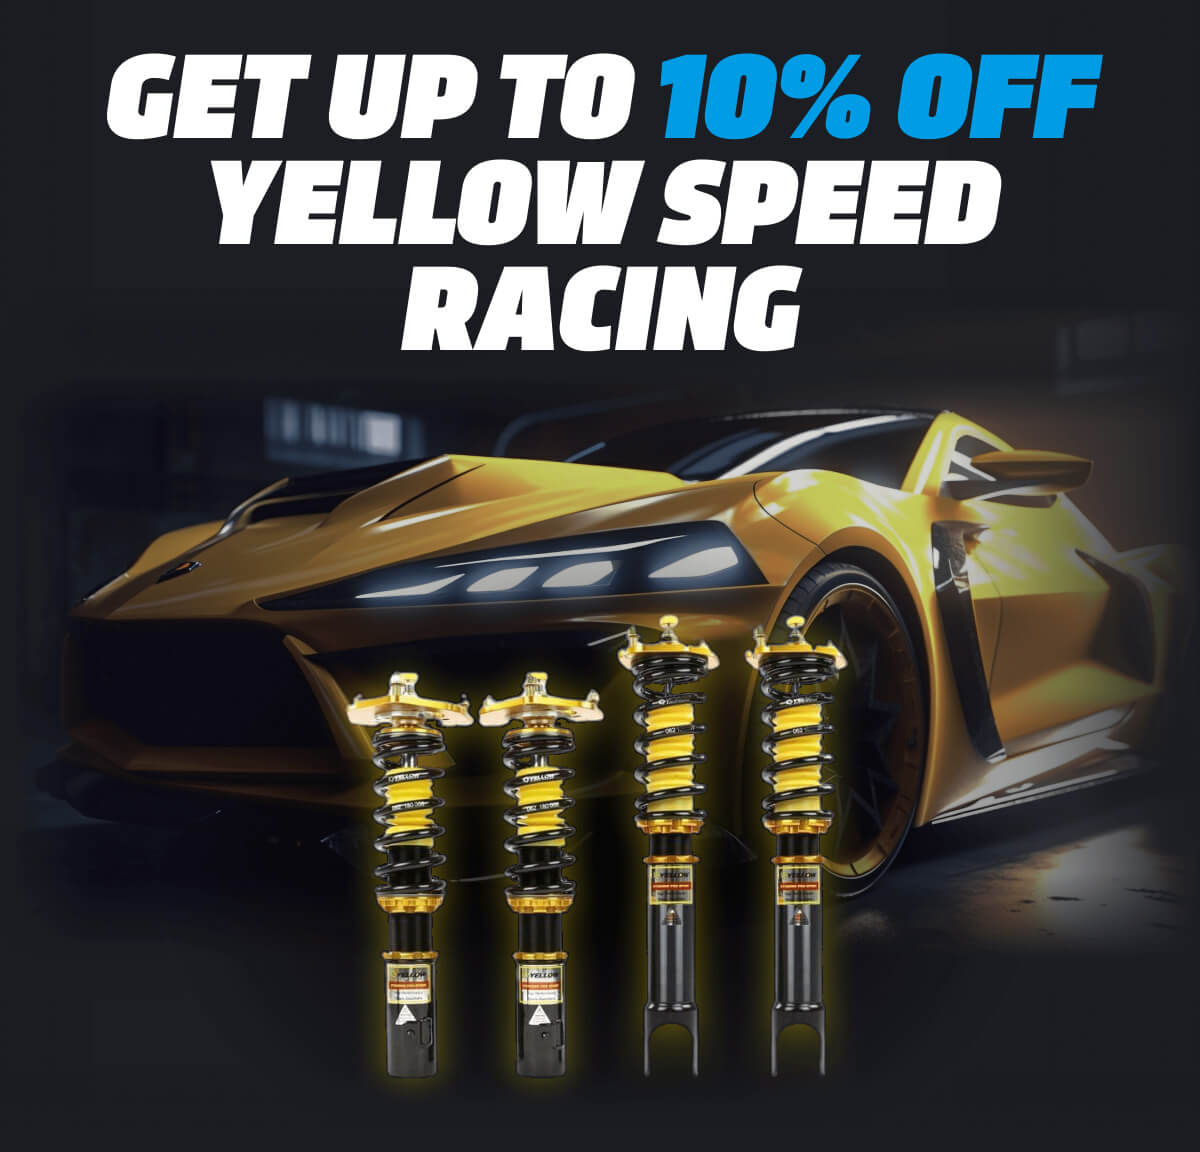 Get Up To 10% Off Yellow Speed Racing